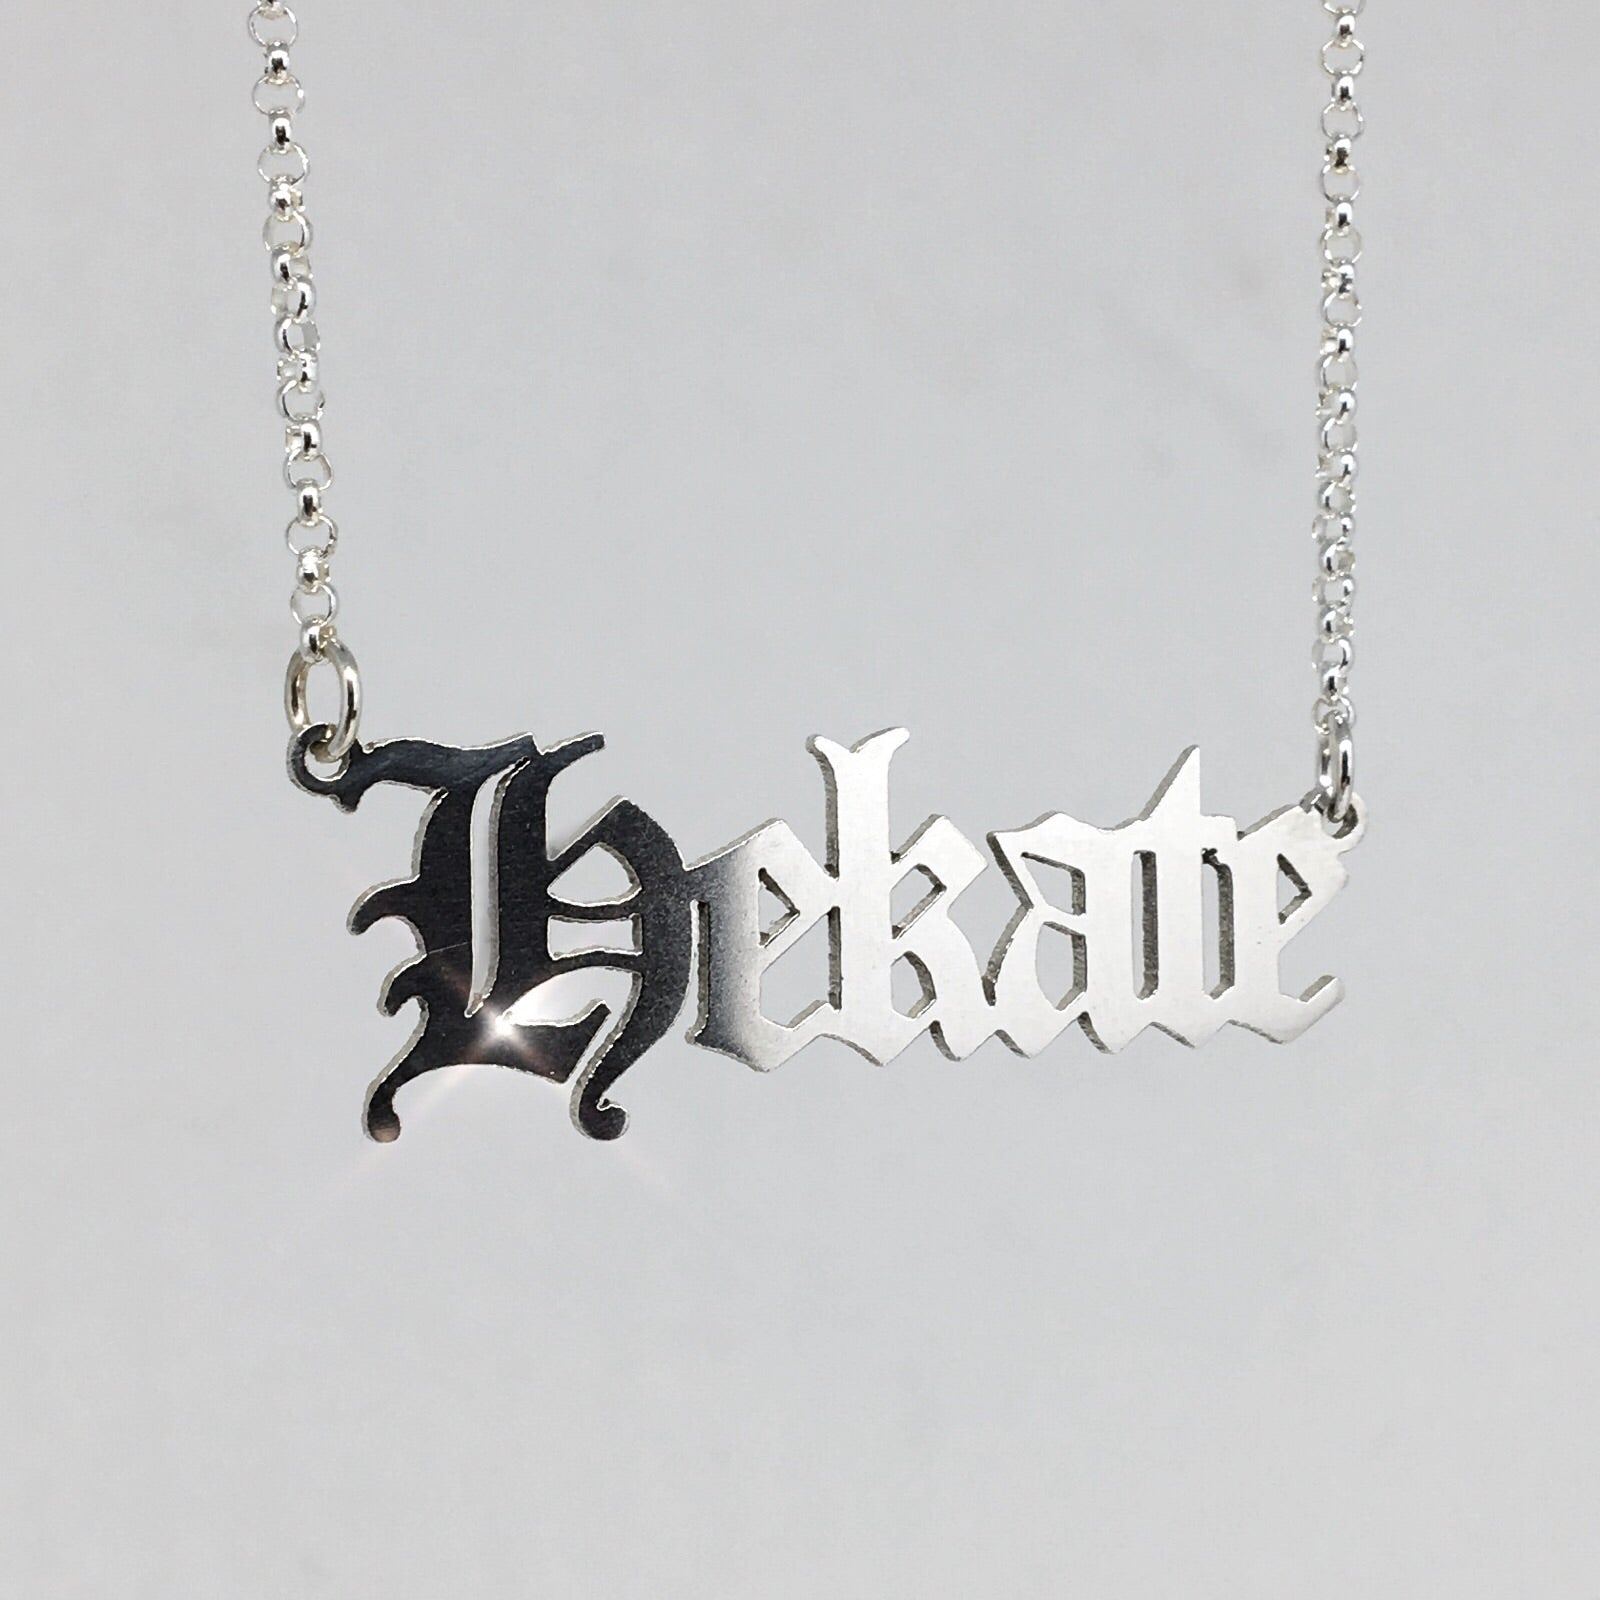 Gothic Blackletter Hekate Nameplate necklace in sterling silver